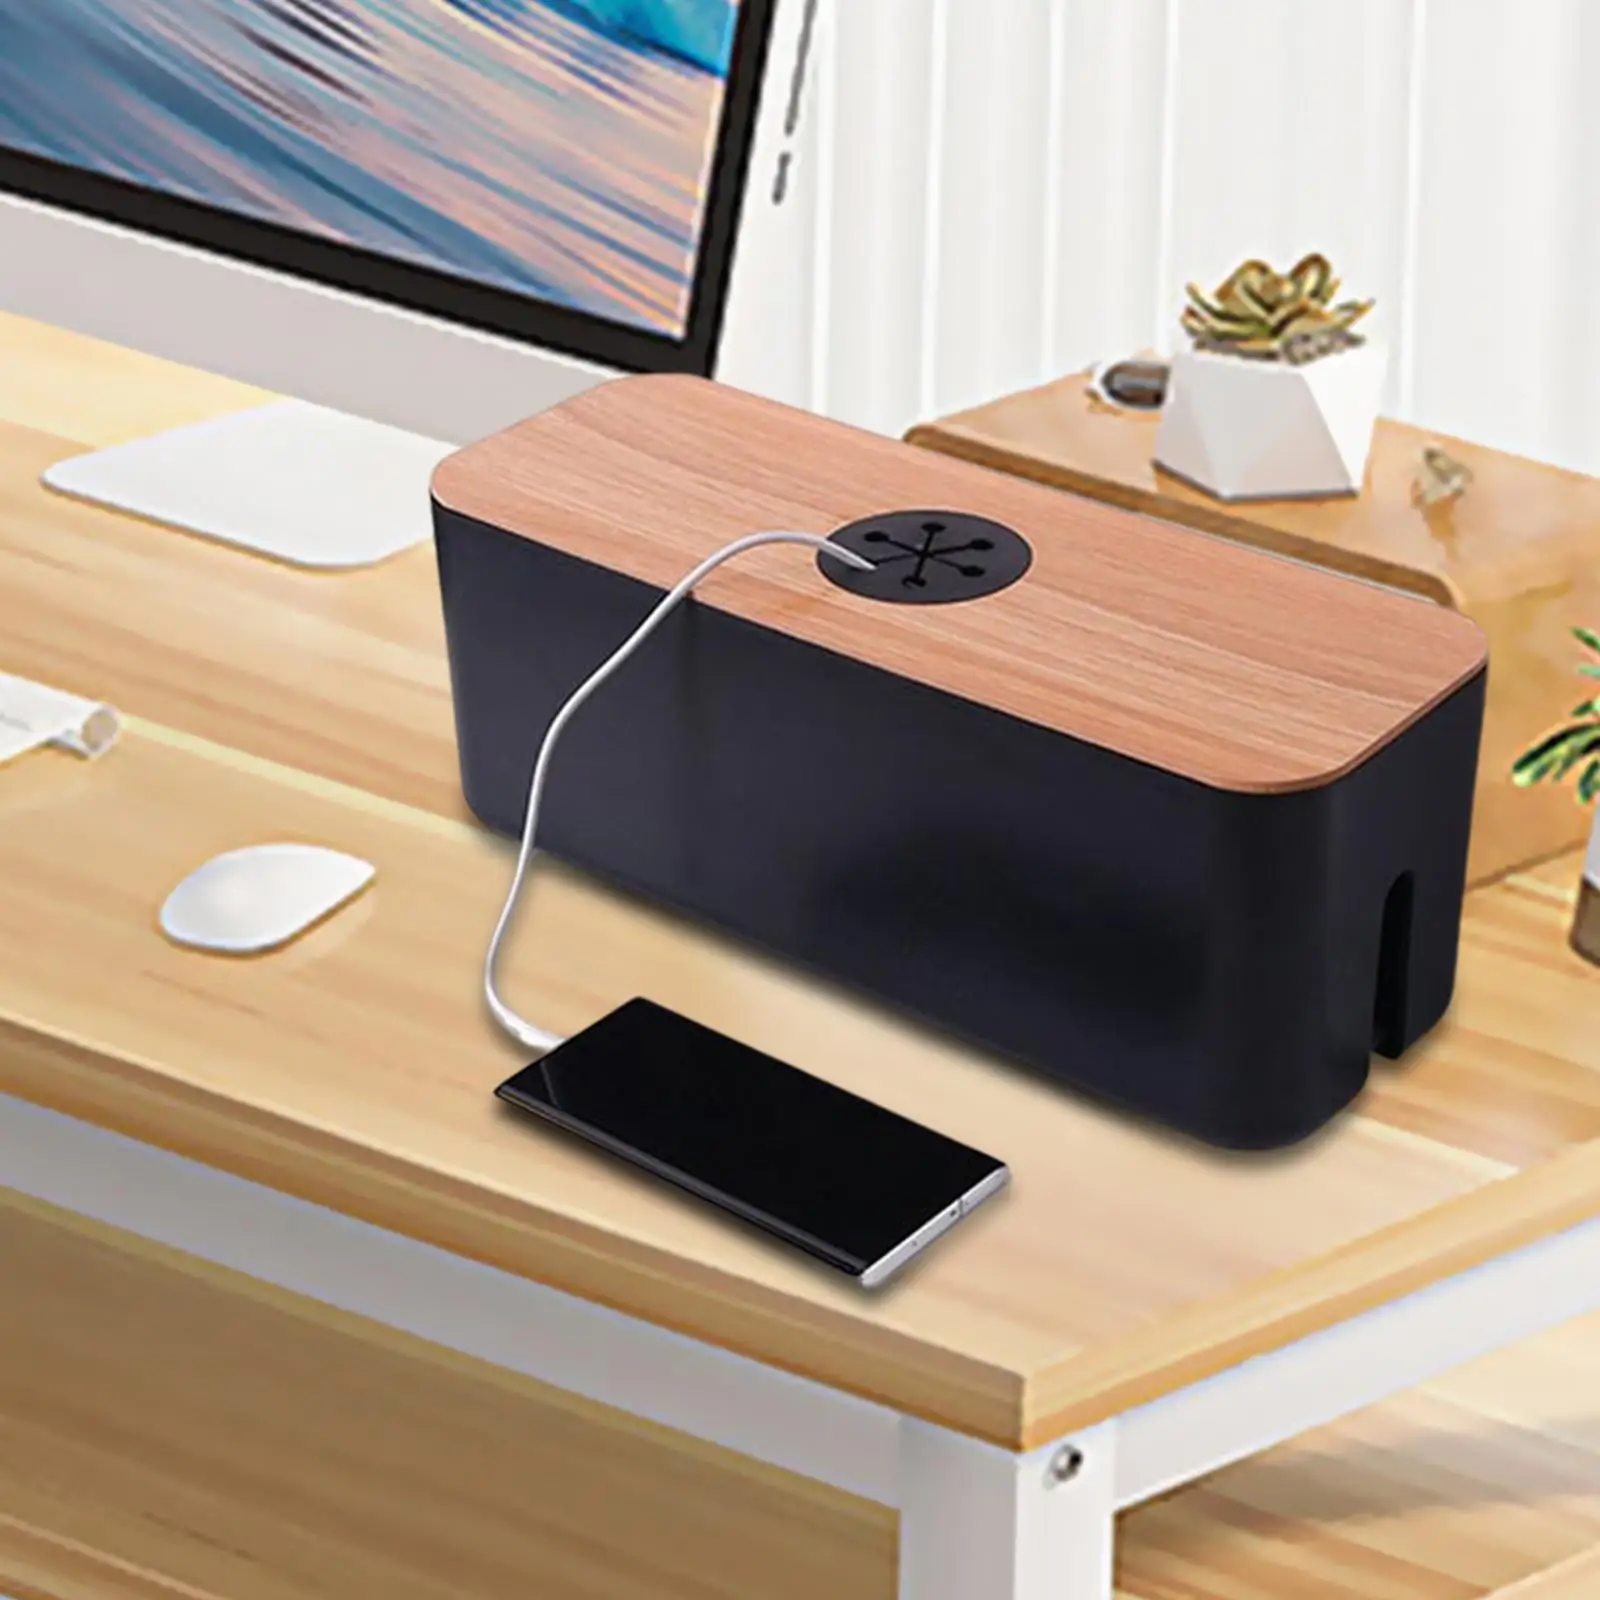 Cable Management Box, to Hide and Organize Your Electrical Cords from TV to Office Desk for and Children Safety